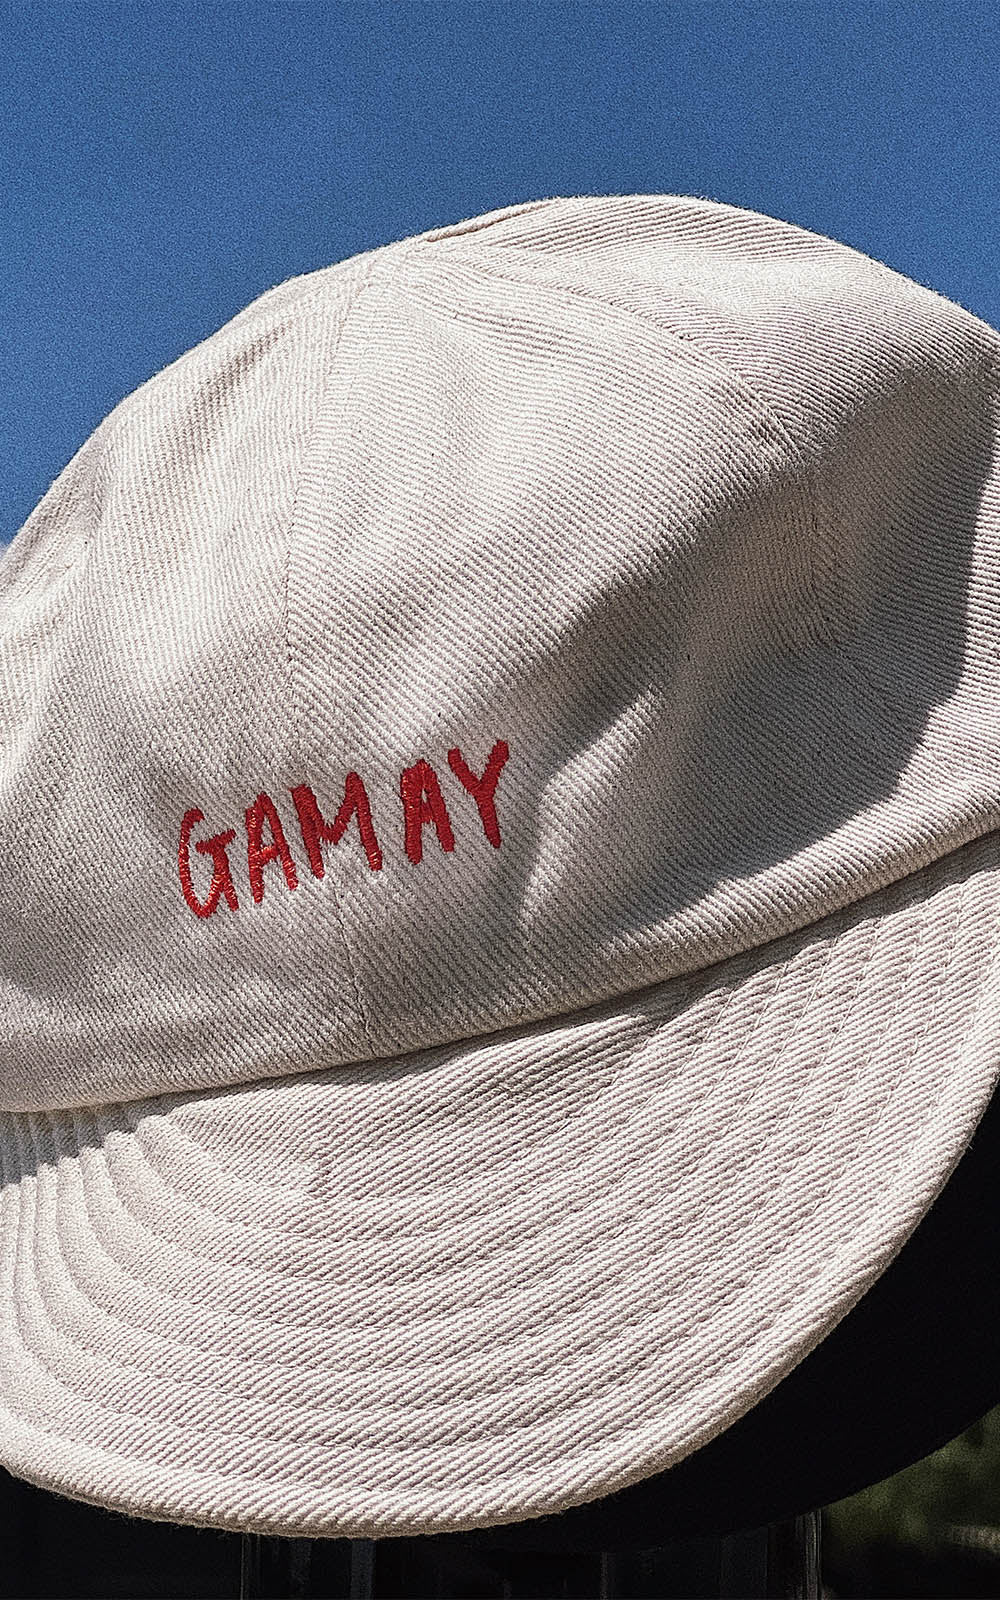 The Official Gamay Cap